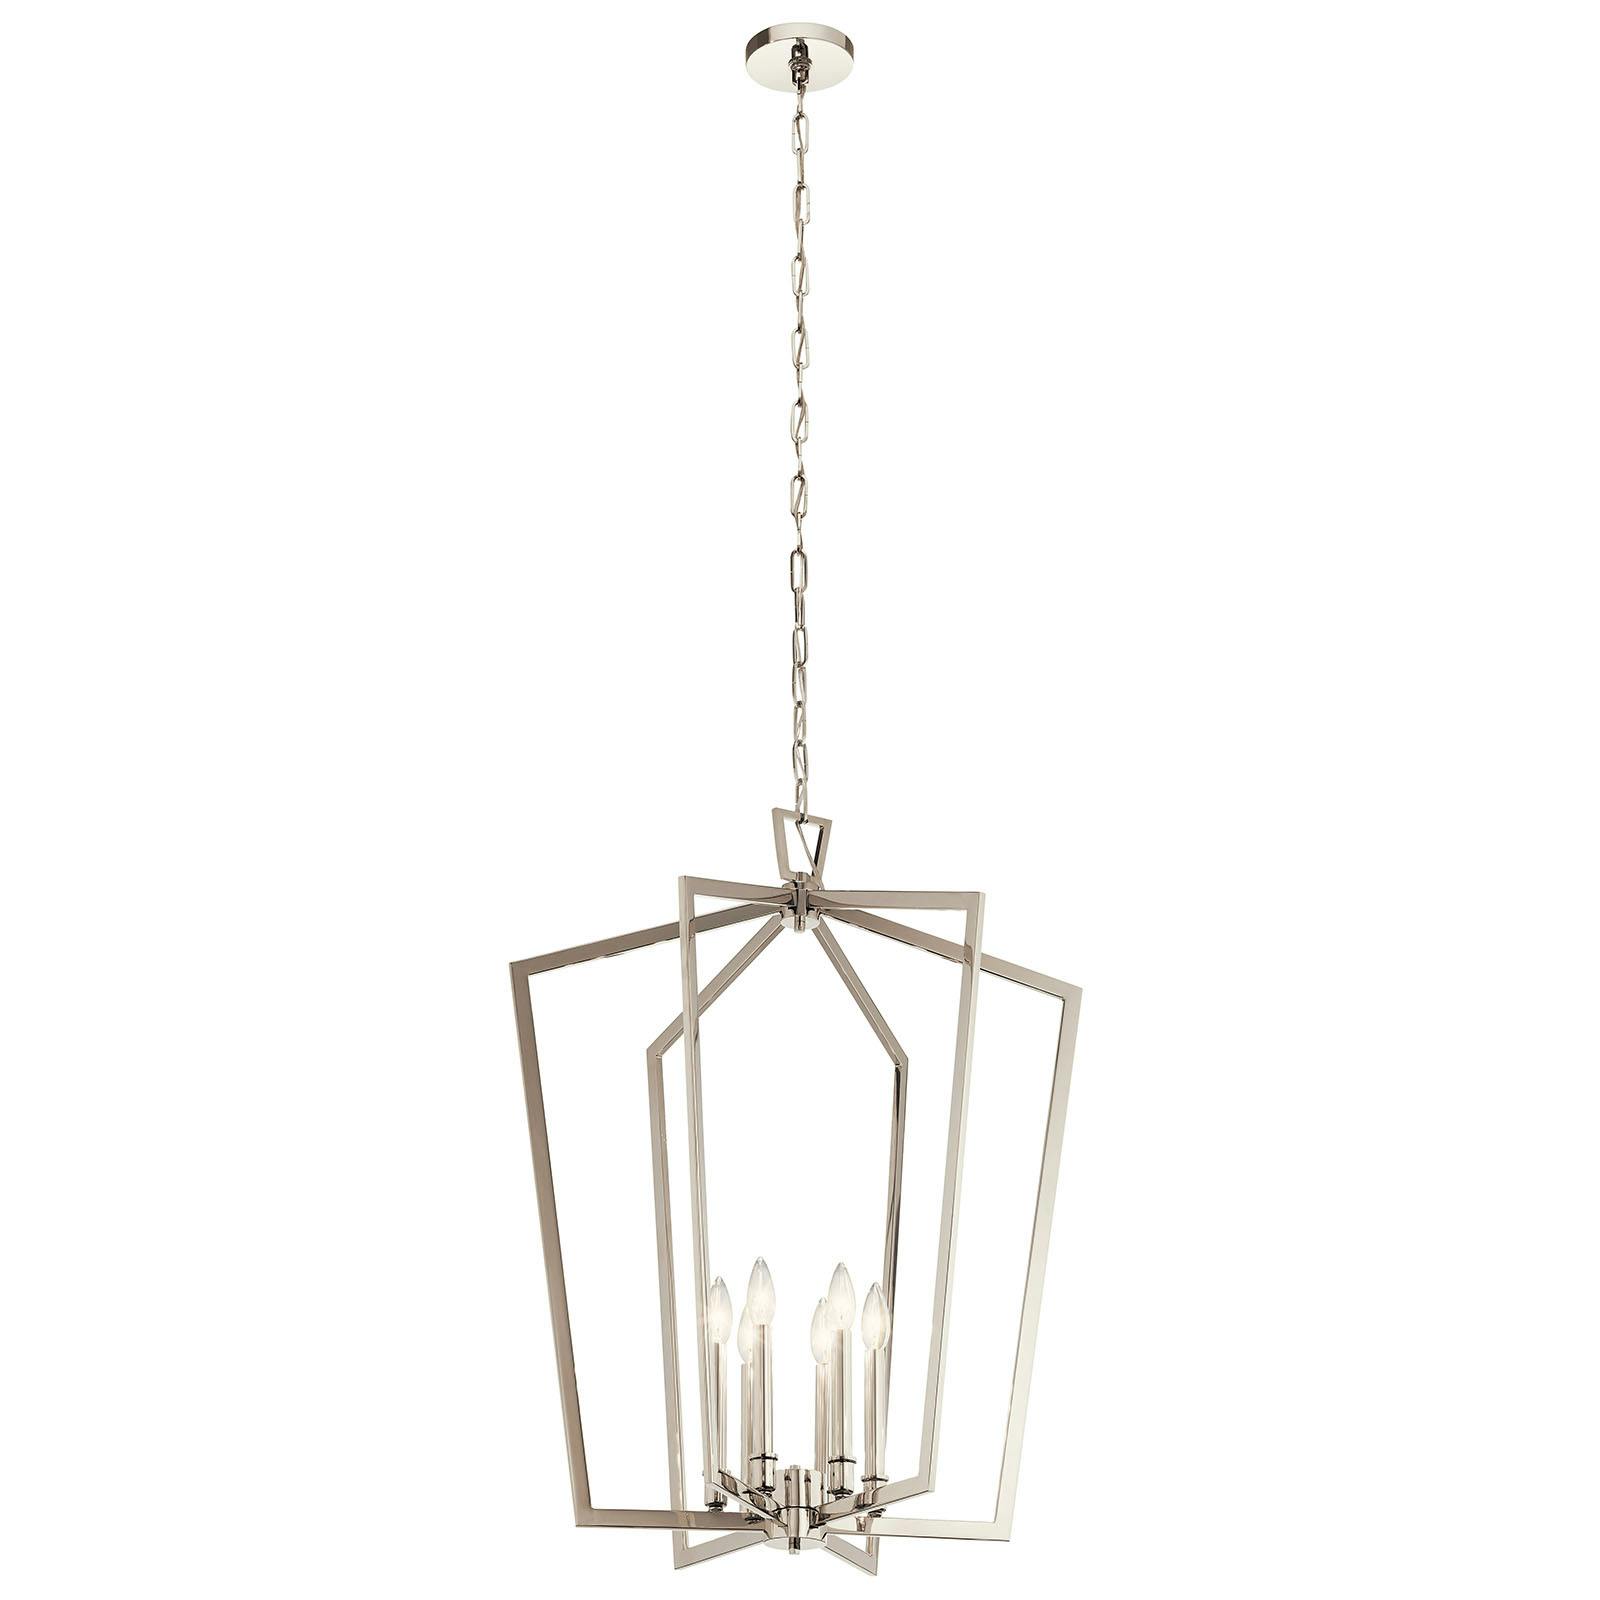 Abbotswell 6 Light Chandelier Nickel on a white background